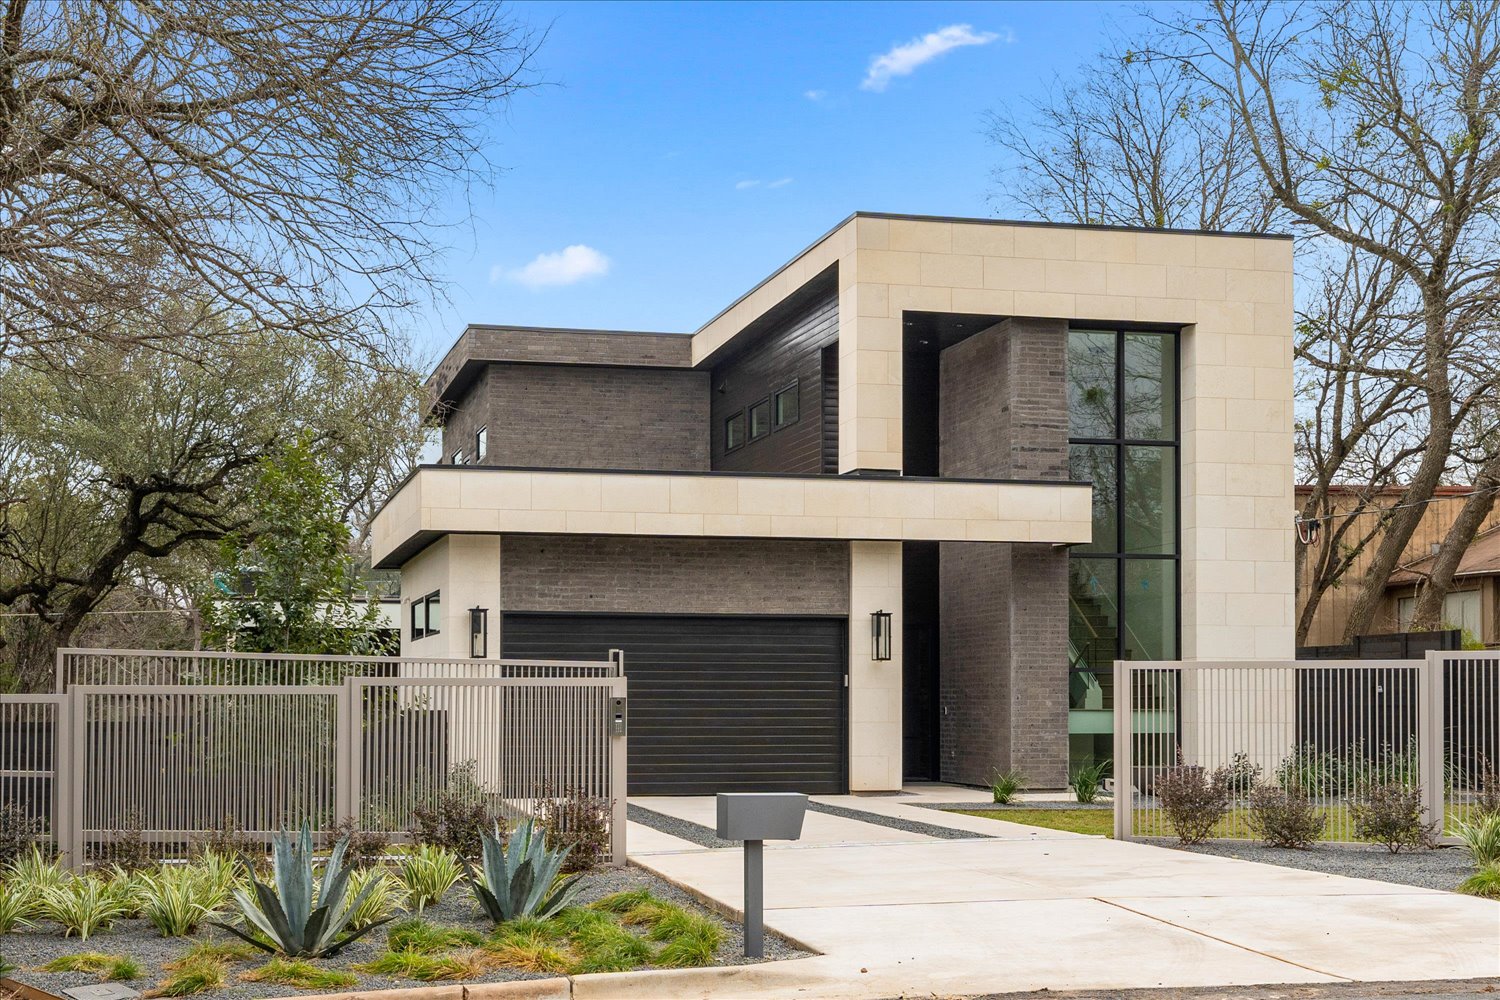 Property: 703 Dondale Cir. Image 002. Paradise Group: Builders of contemporary luxury homes.